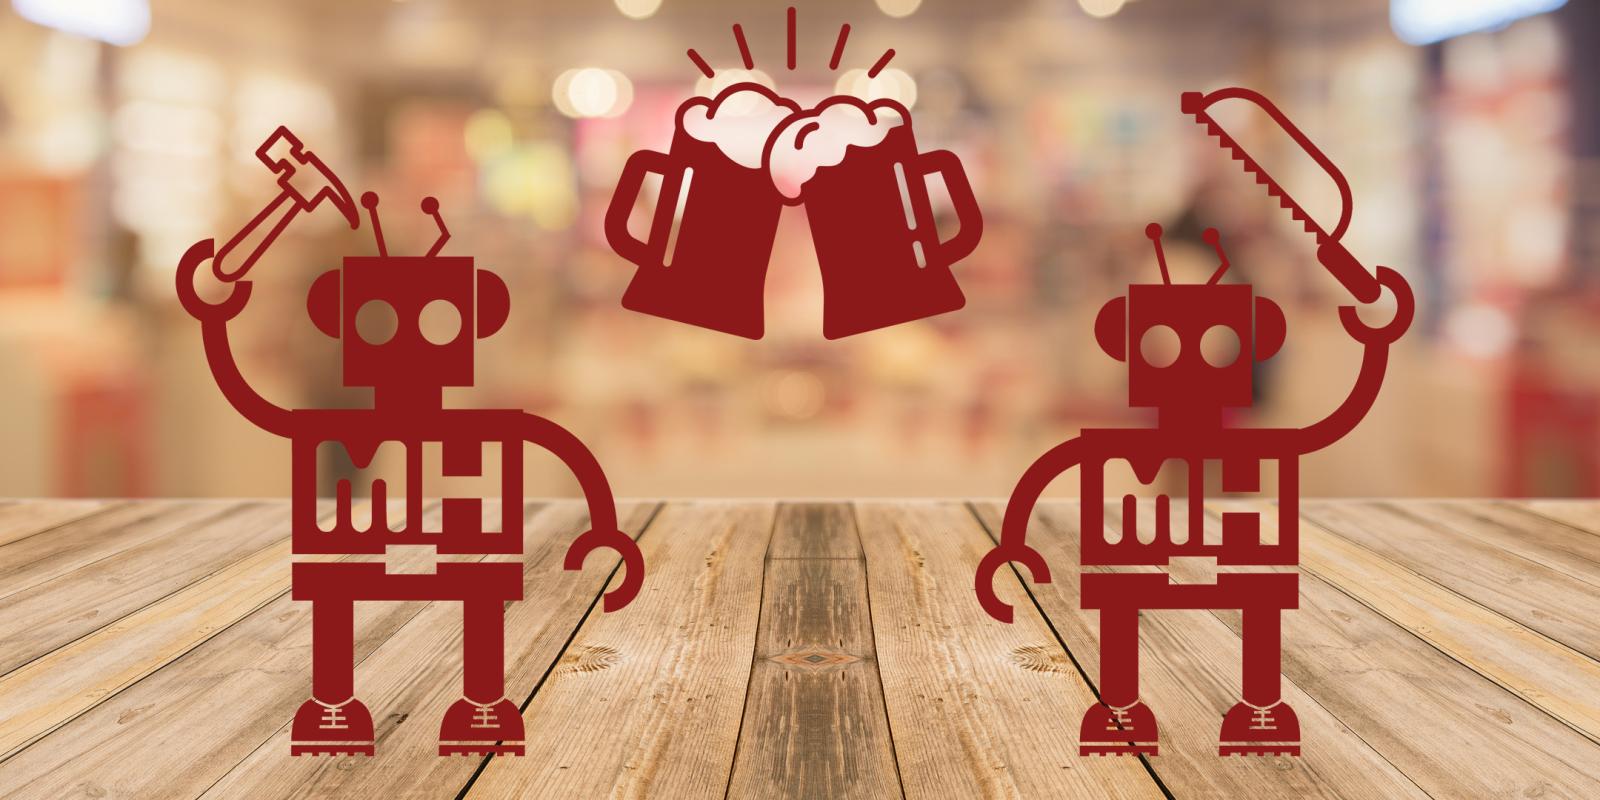 Two red robots with MH logos holding up woodworking tools (a hammer and a saw)